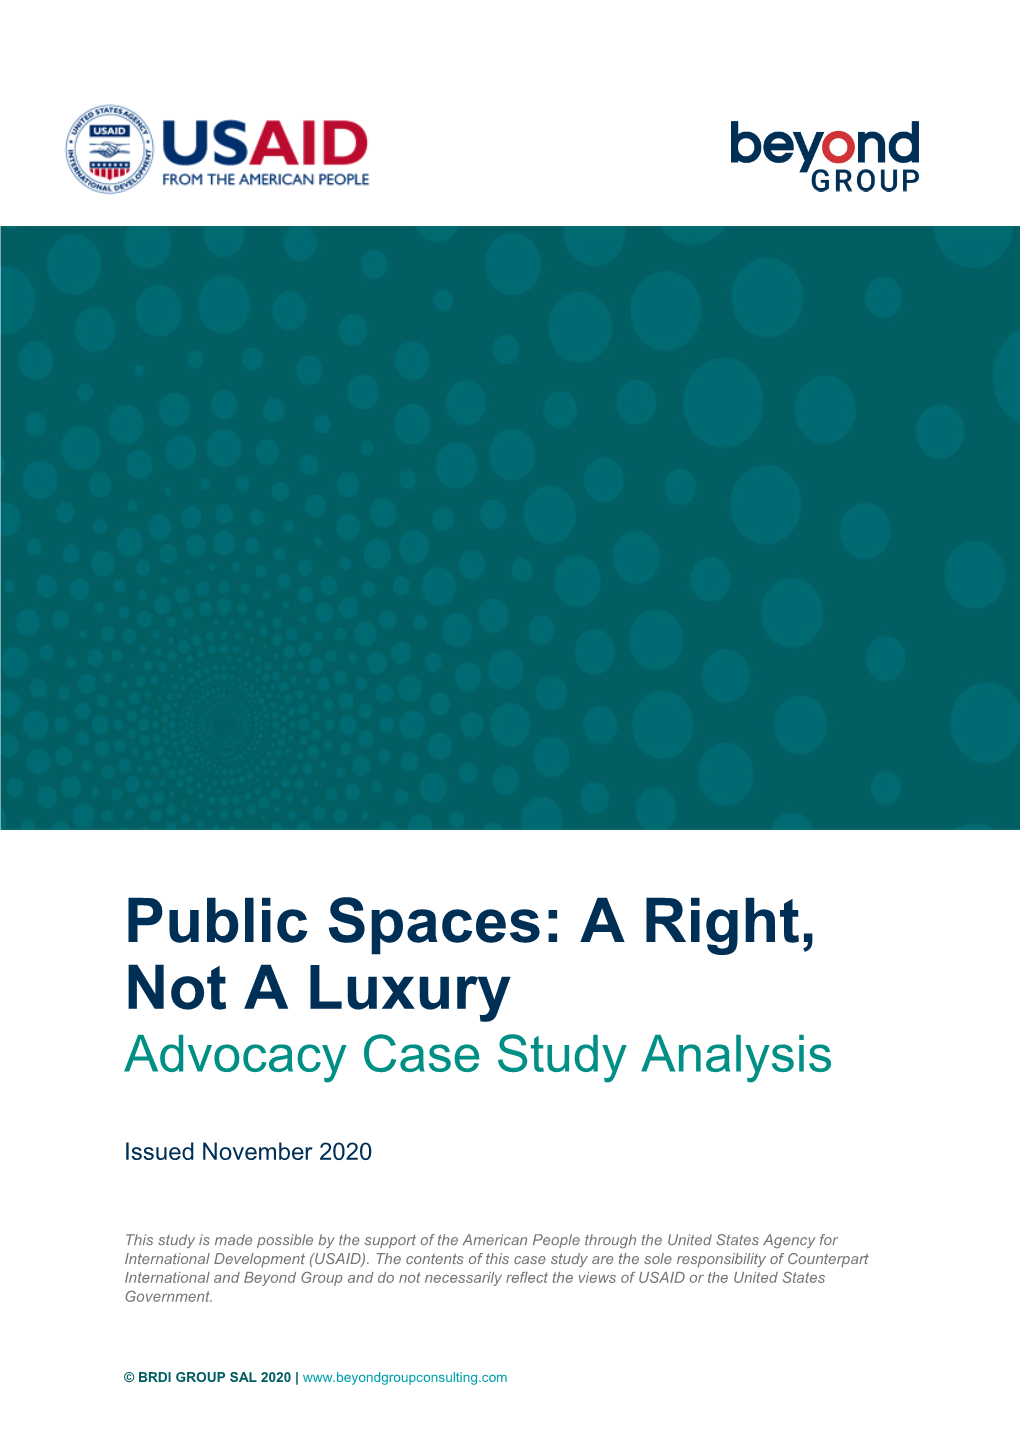 Public Spaces: a Right, Not a Luxury Advocacy Case Study Analysis